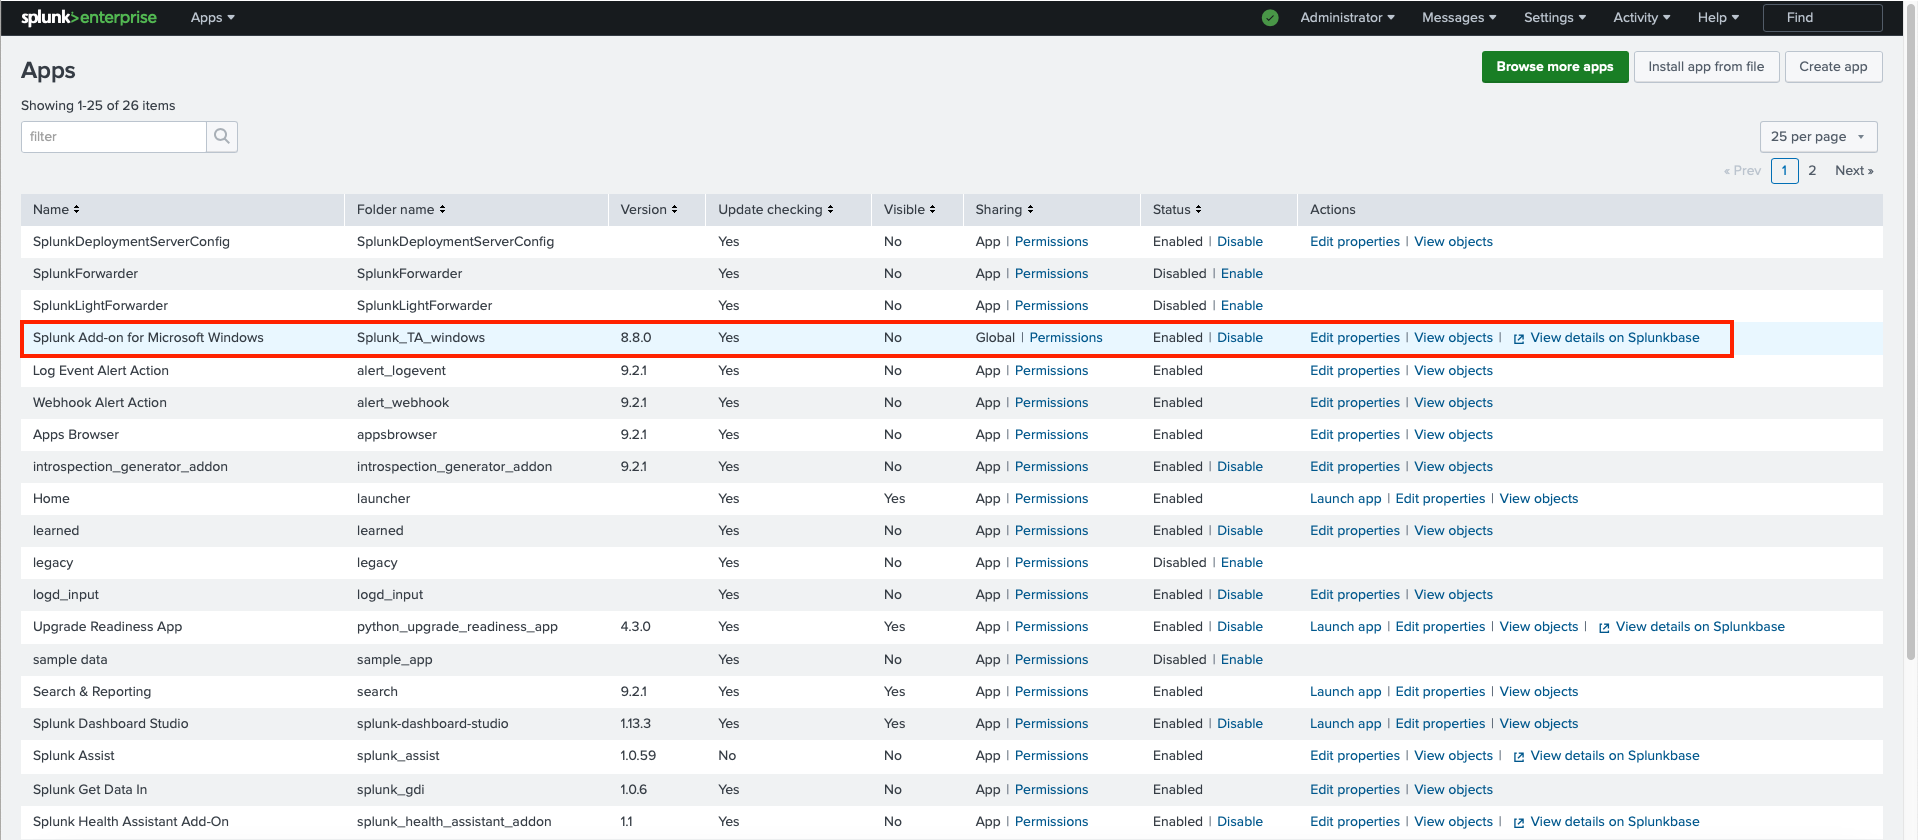 Splunk Enterprise management screen showing the installed 'Splunk Add-on for Microsoft Windows' highlighted in the list of apps.